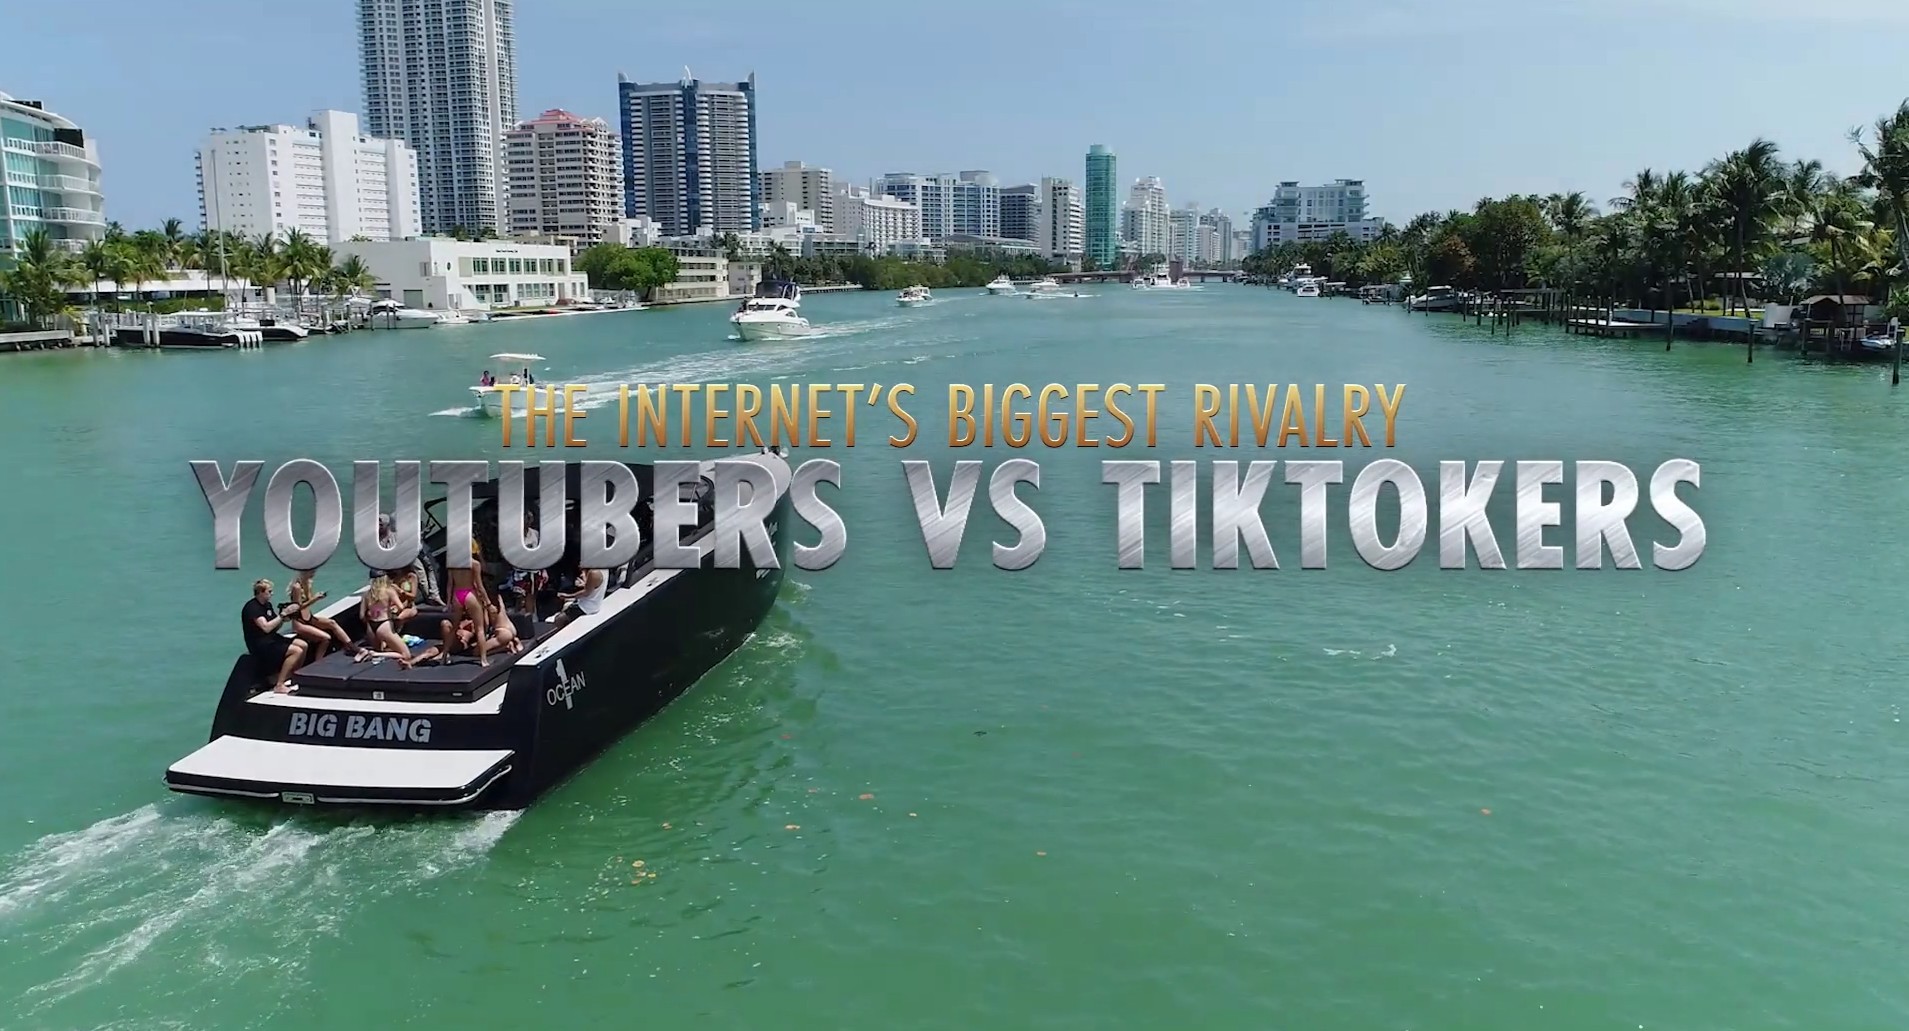 A Bunch Of Tiktokers And Youtubers Are Going To Beat The Crap Out Of Each Other